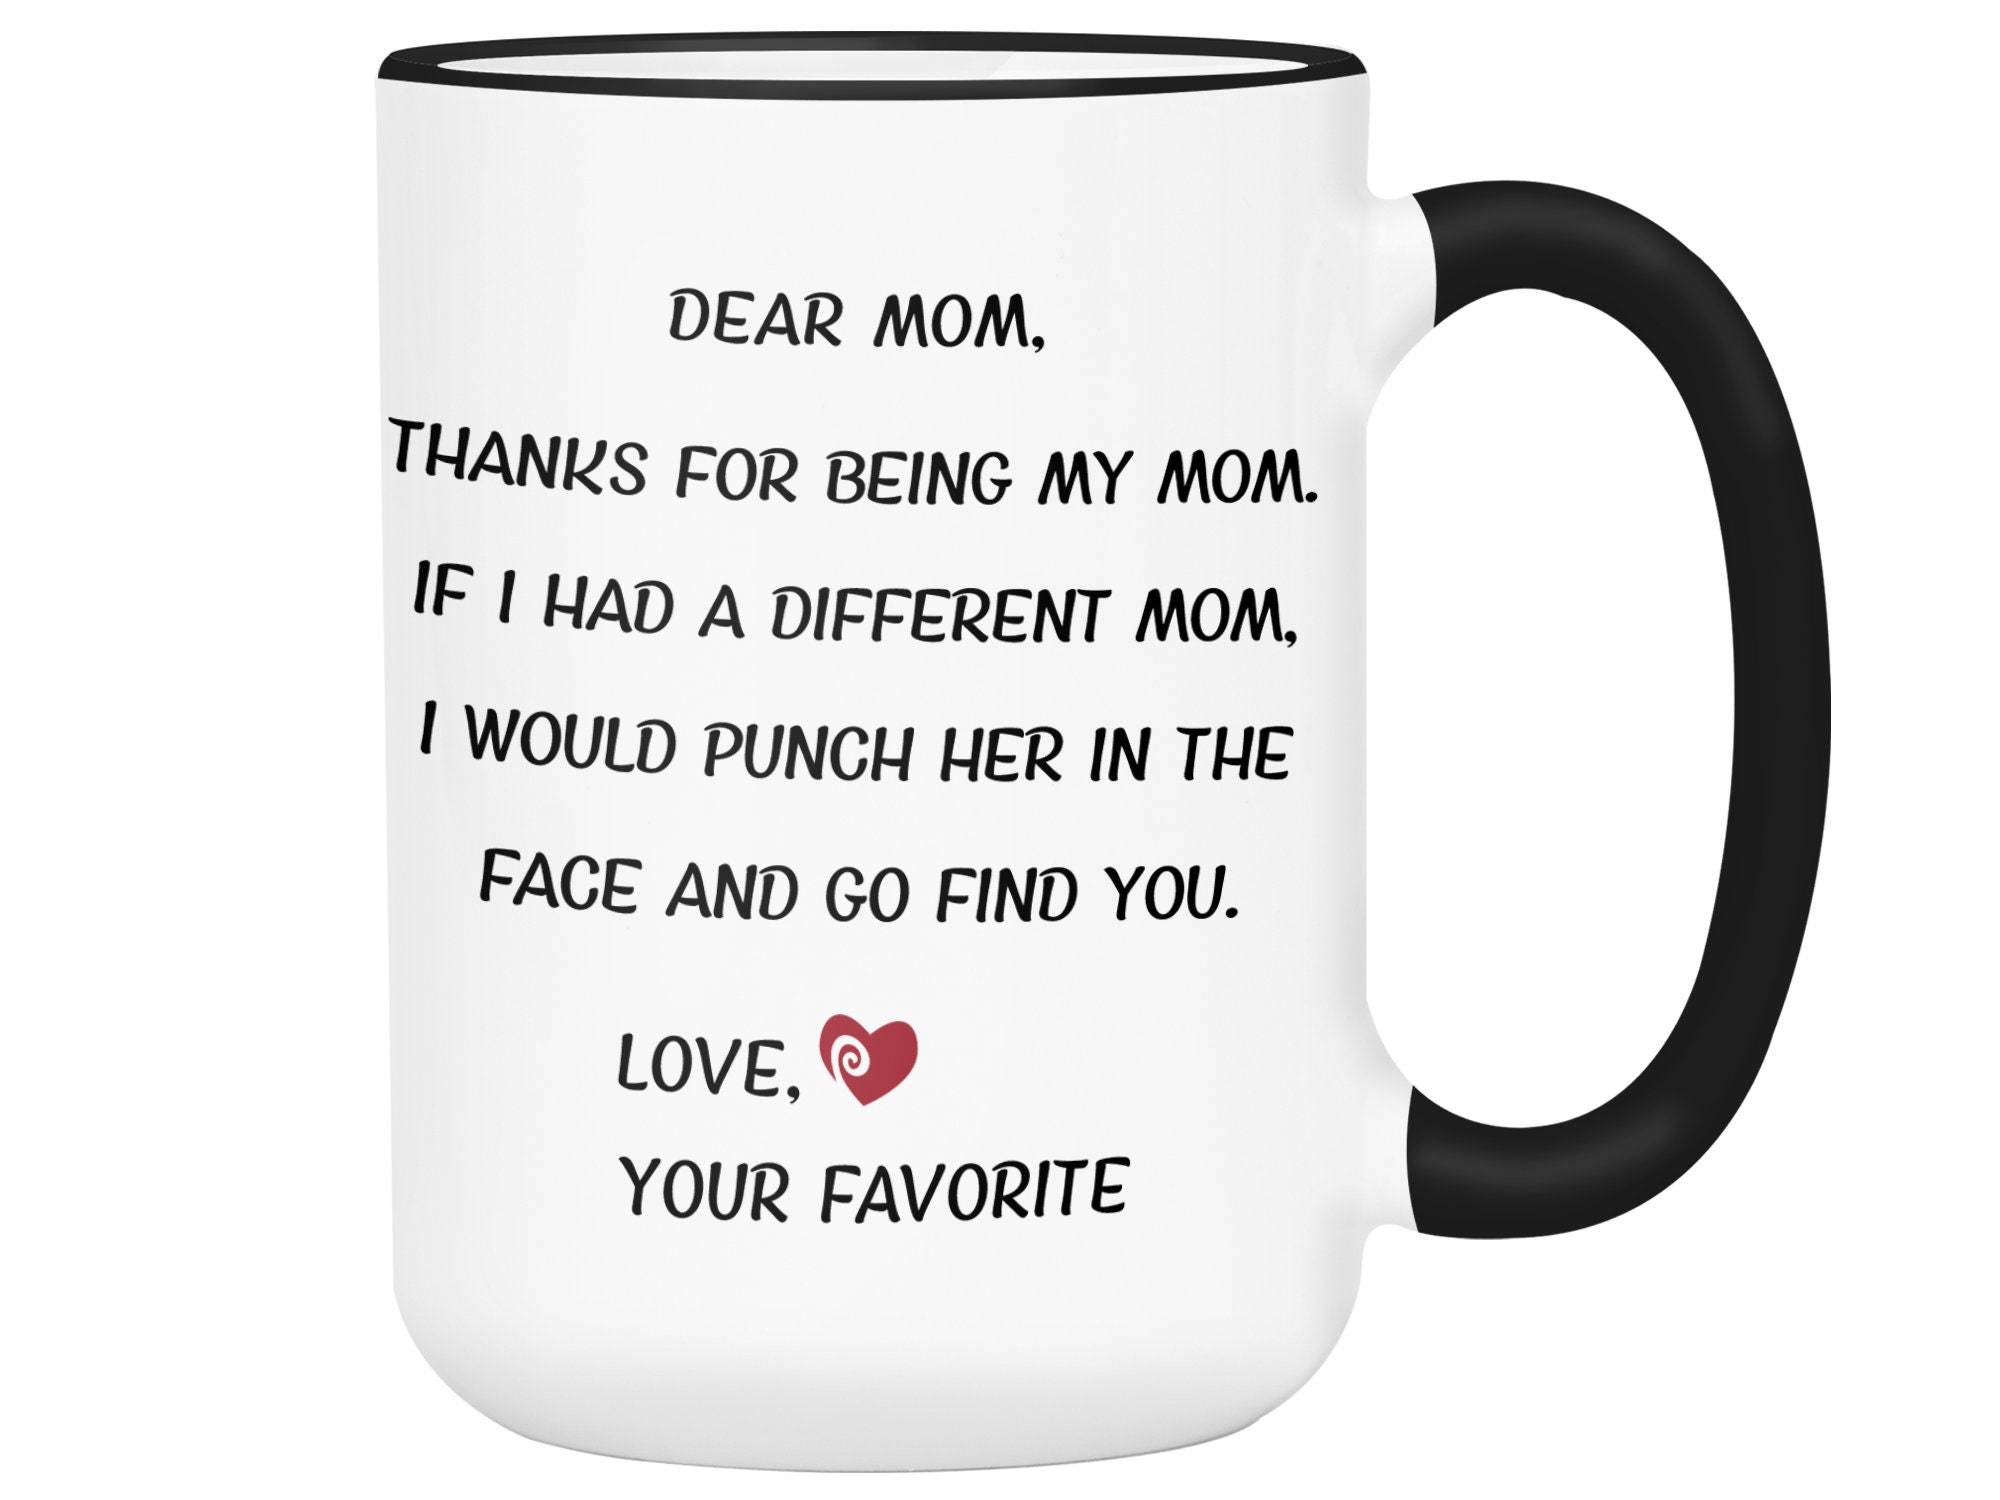 Gifts for Mom, Gag Gifts for Mother's Day, Birthday Gifts for Mom from  Daughter Son, Mom Gifts for Christmas Thanksgiving, Gifts for Women,  Presents